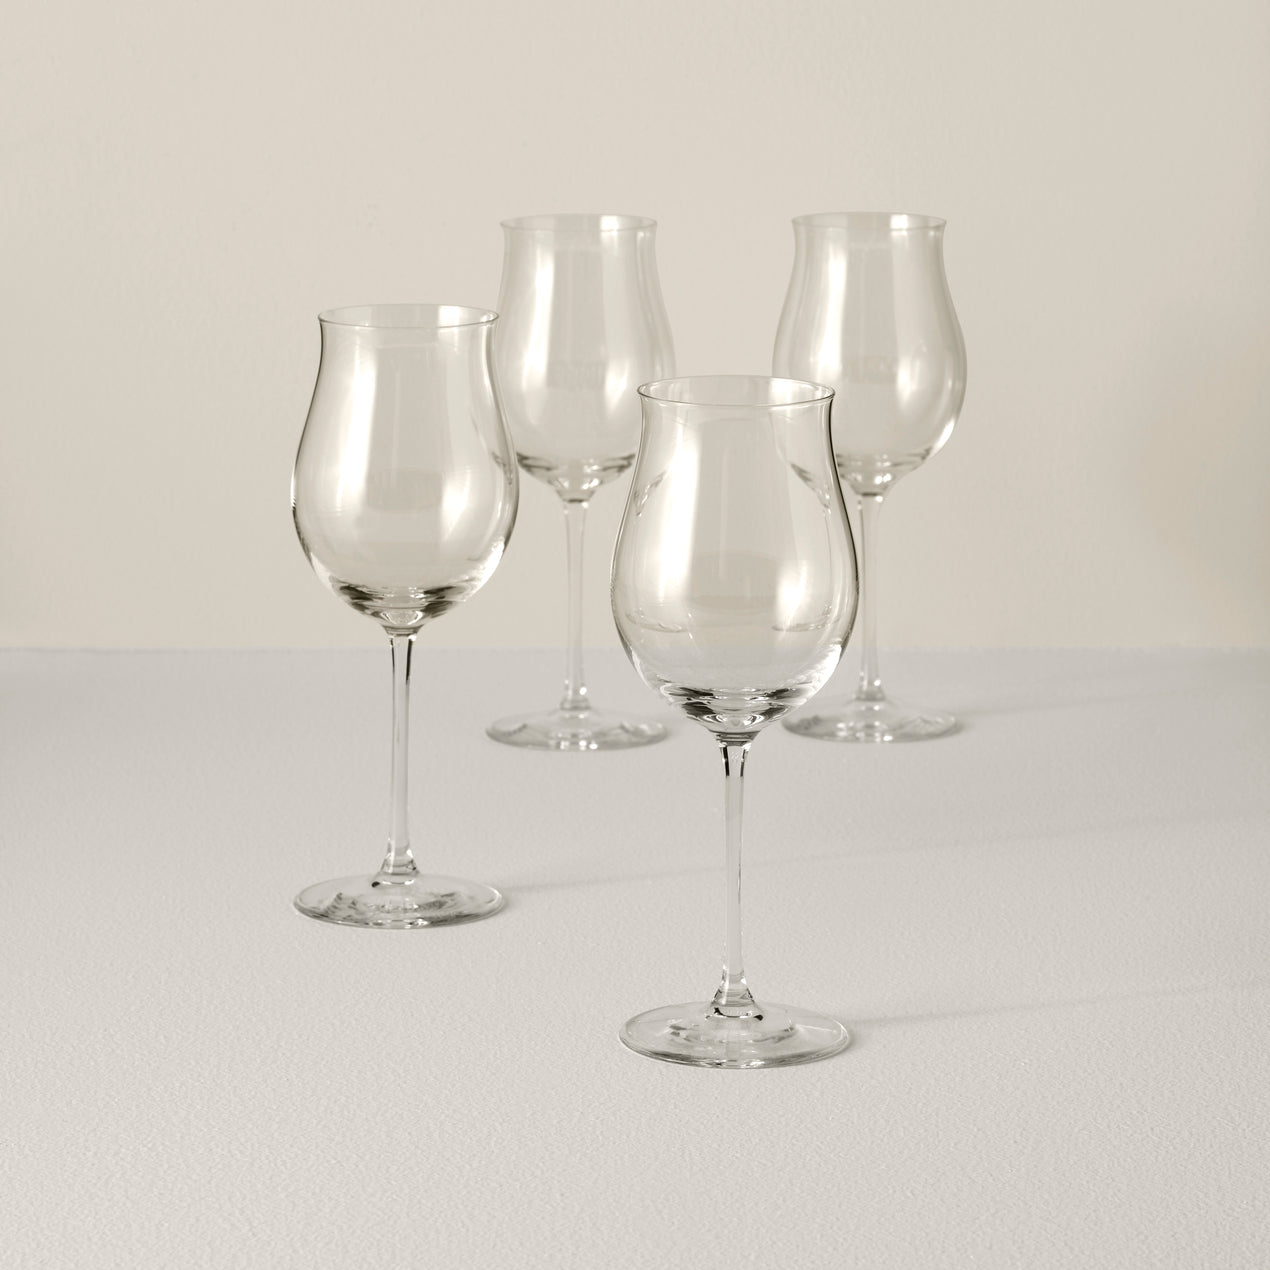 Personalized Crystal flared glasses - Great Wedding Party Gift